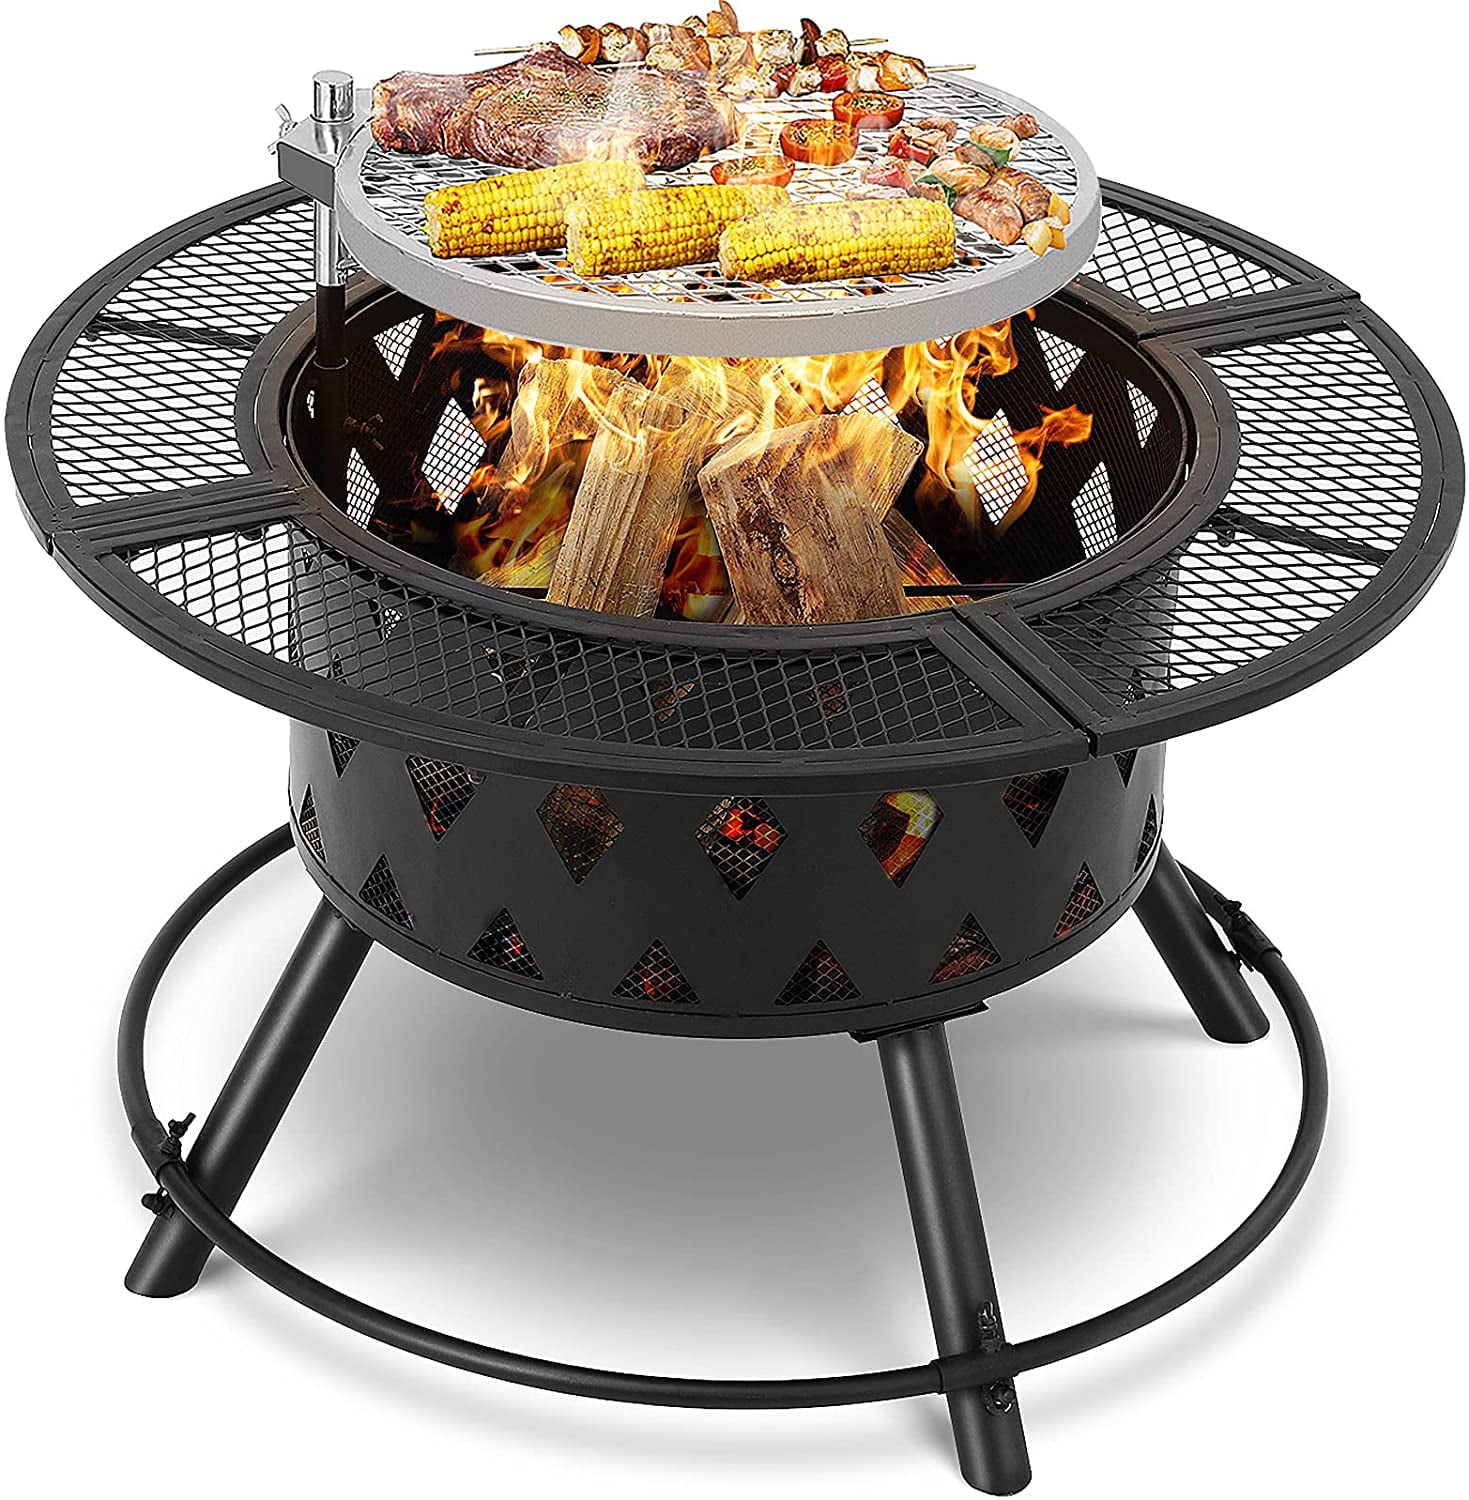 Outdoor Wood Burning Fire Pit, Heavy Duty Fire Pit Cooking Grate